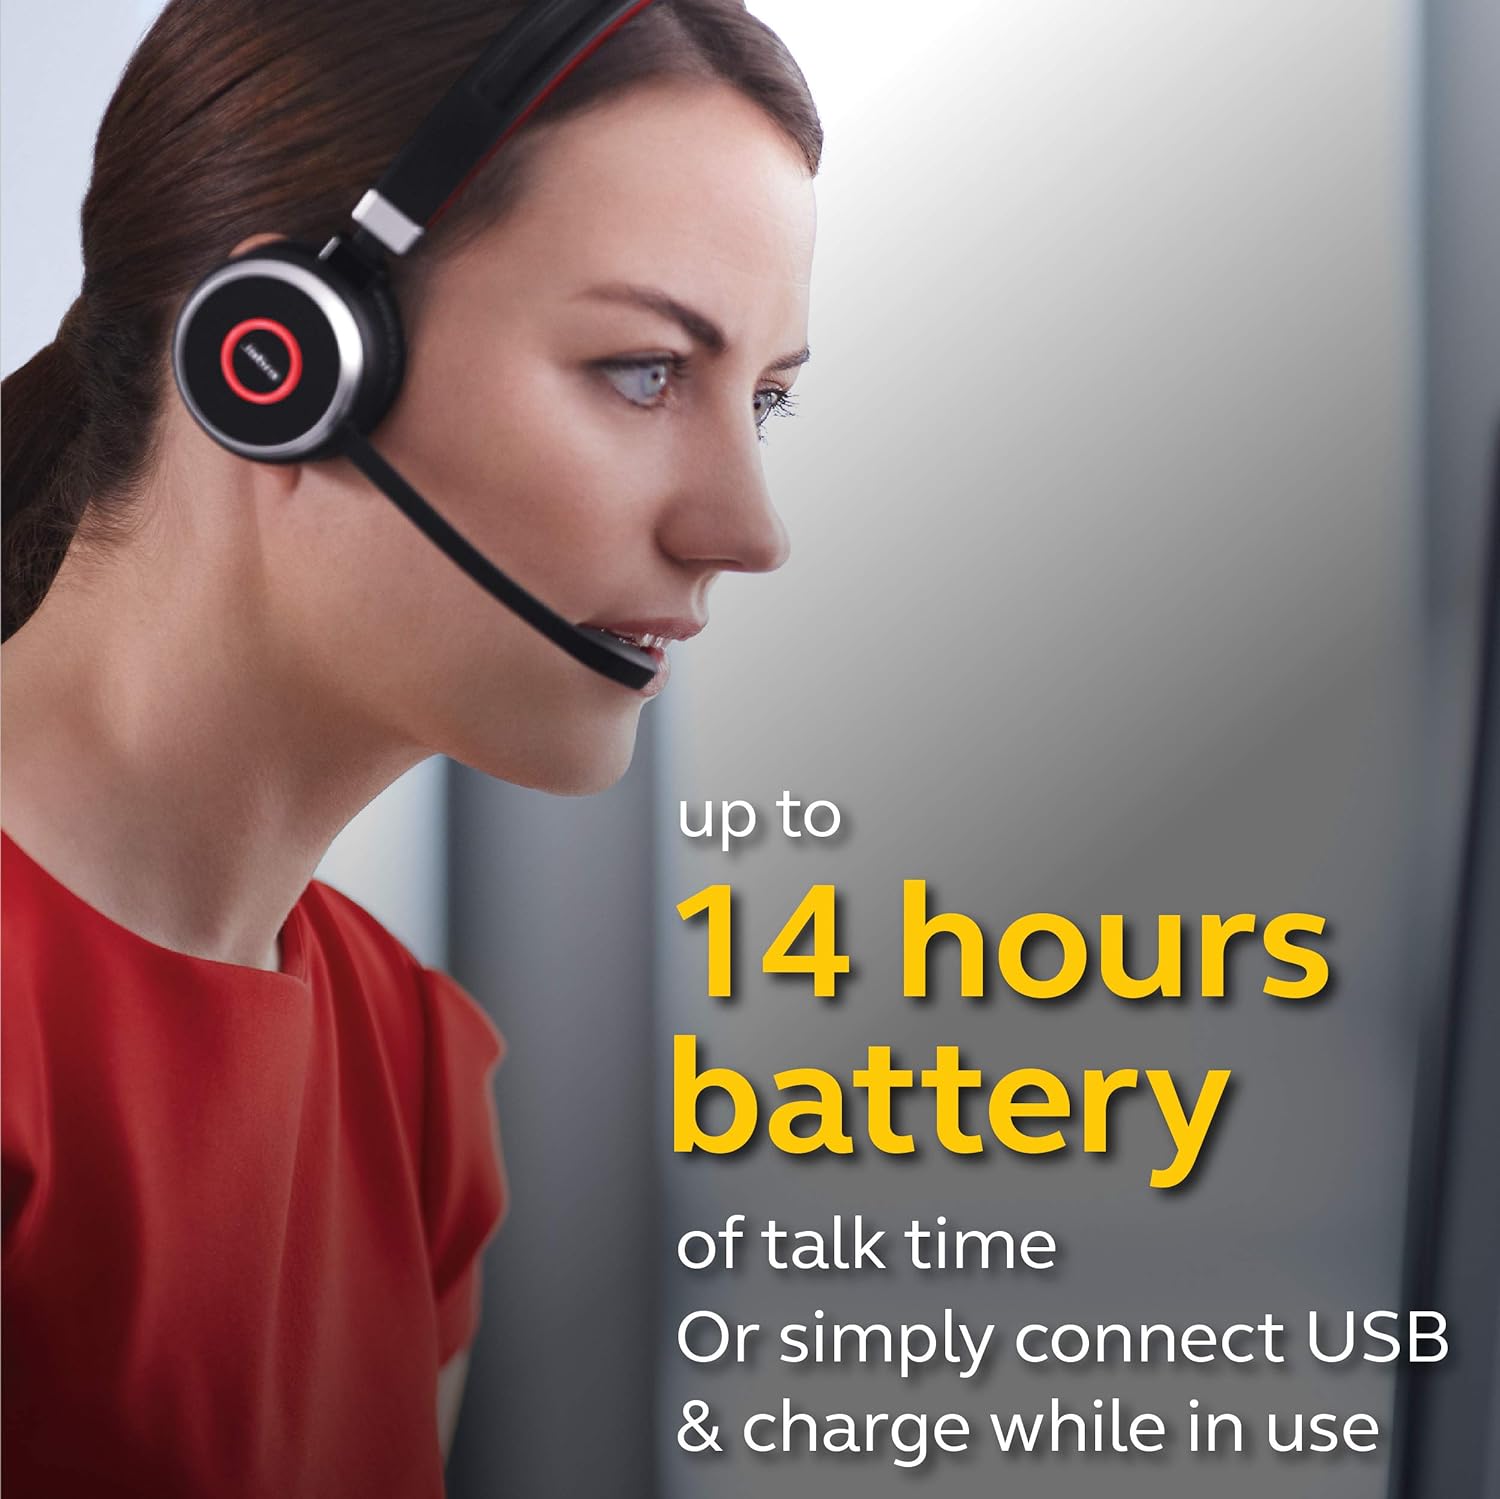 Connect your Jabra Evolve 65 headset to the computer using a USB cable
Open the Jabra Direct software